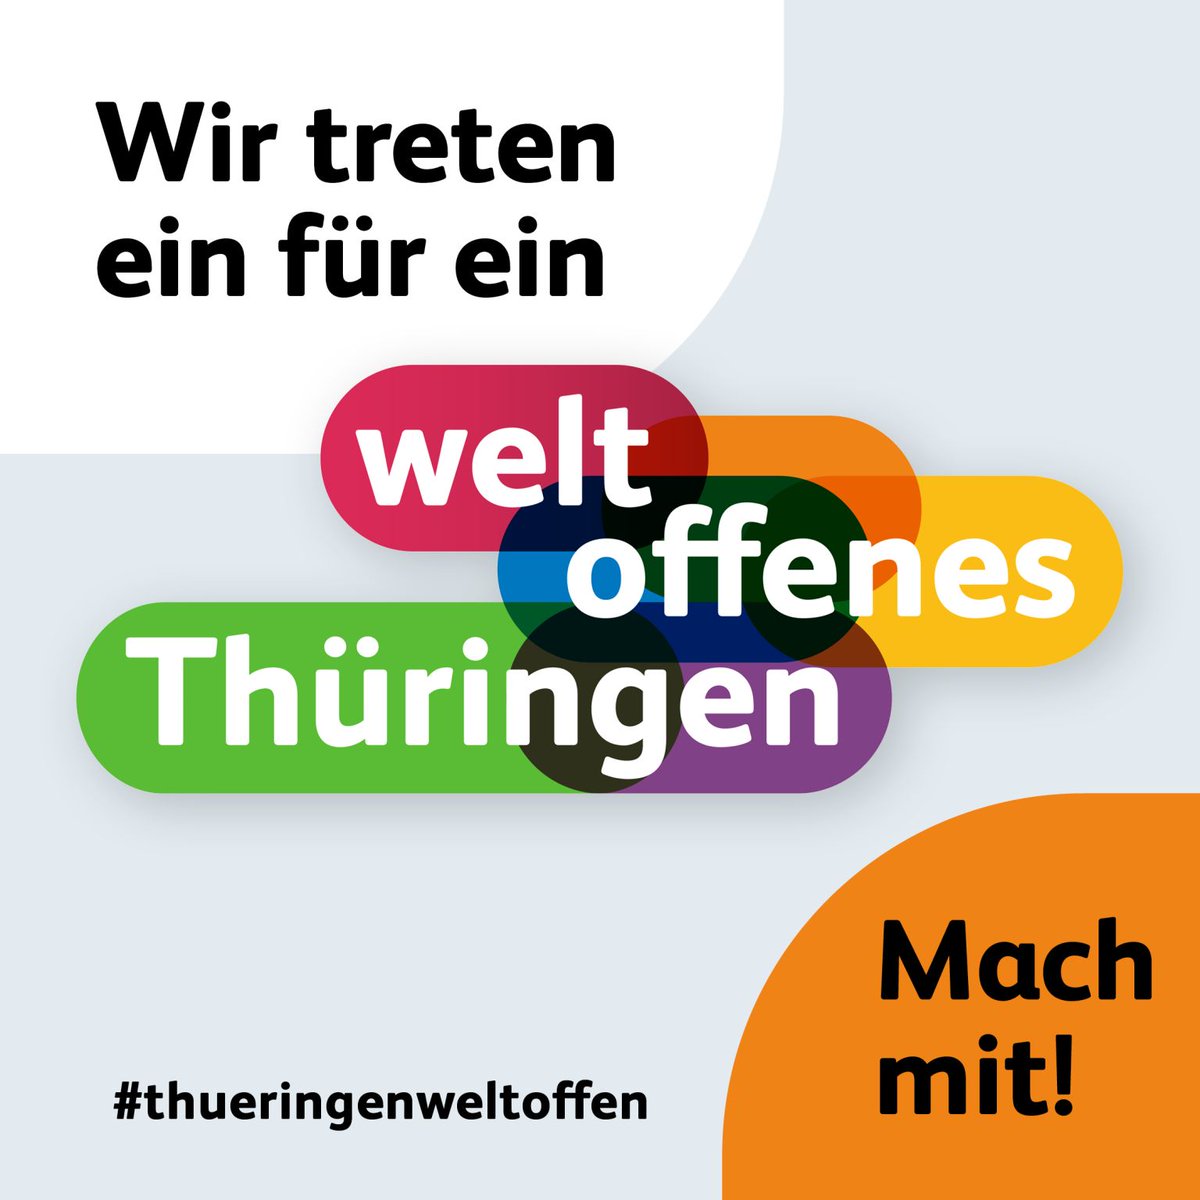 Exciting news! The Brandt School is now part of 'Weltoffenes Thüringen', an initiative dedicated to strengthening democracy in Germany🤝 We stand for openness, human rights, diverse democracy, and a welcoming Thuringia. Read more👉🏼thueringen-weltoffen.de #thueringenweltoffen